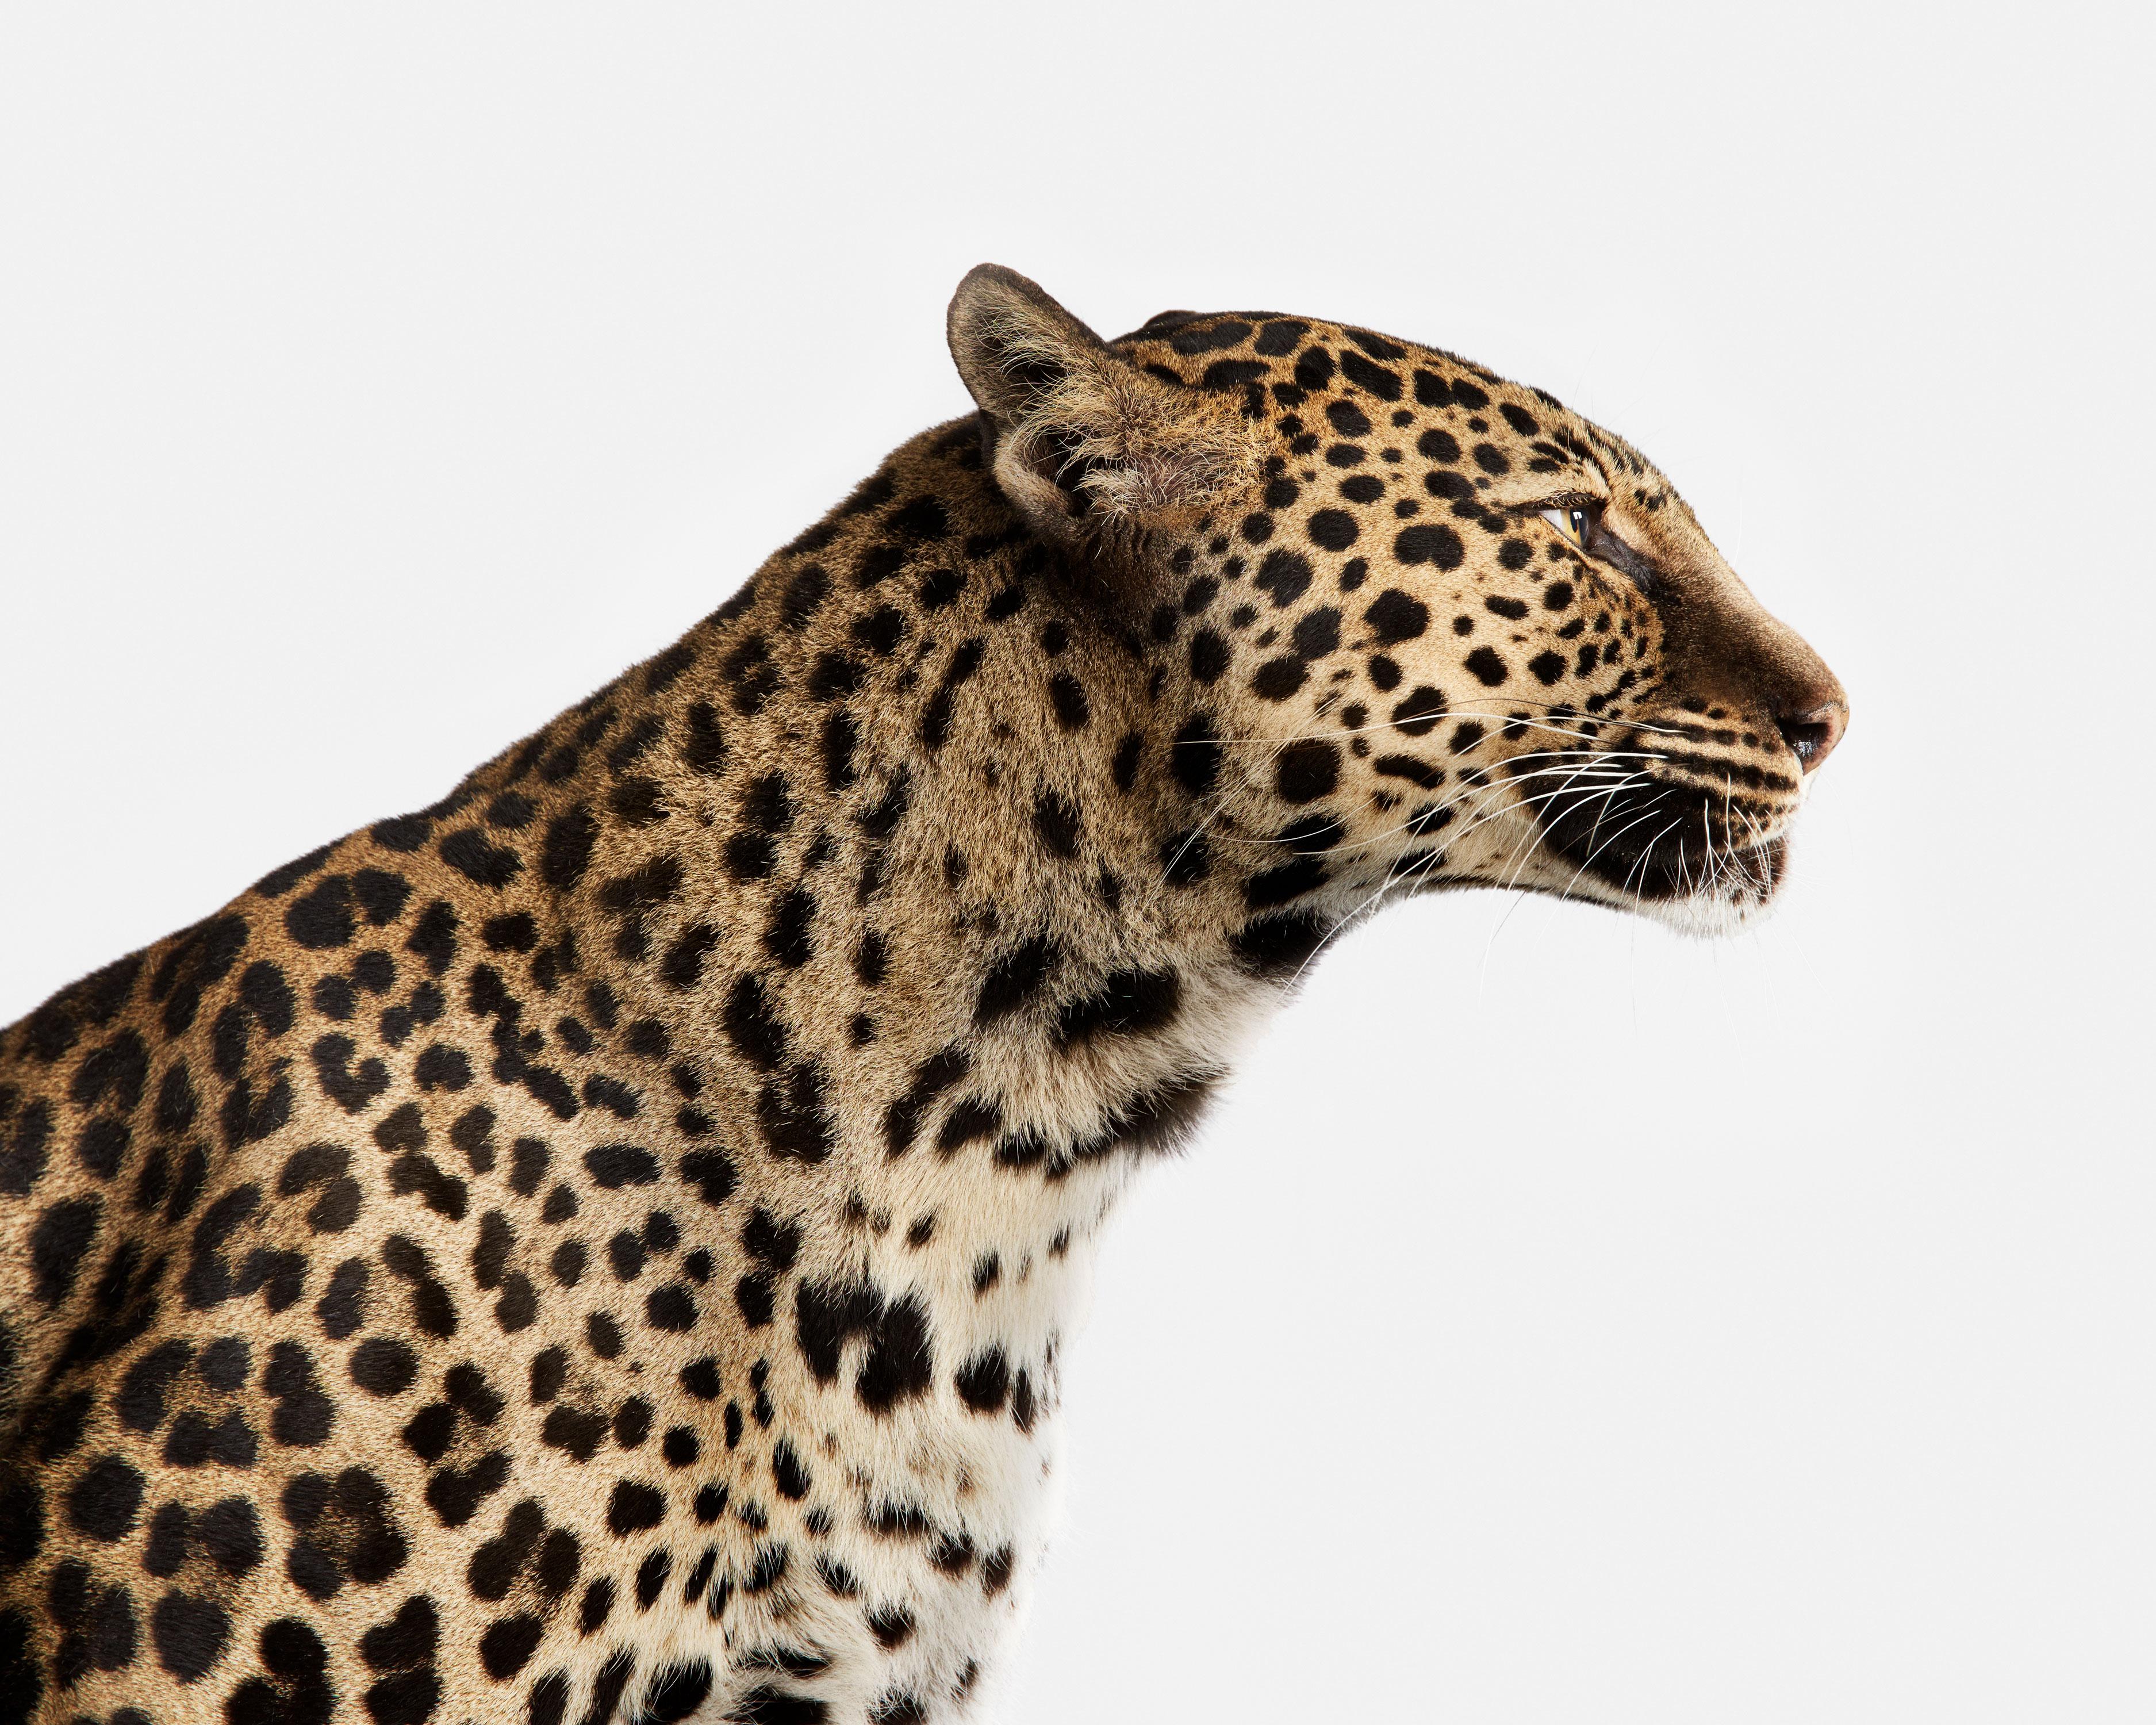 Randal Ford Color Photograph - Spotted Leopard No. 1 (40" x 50")